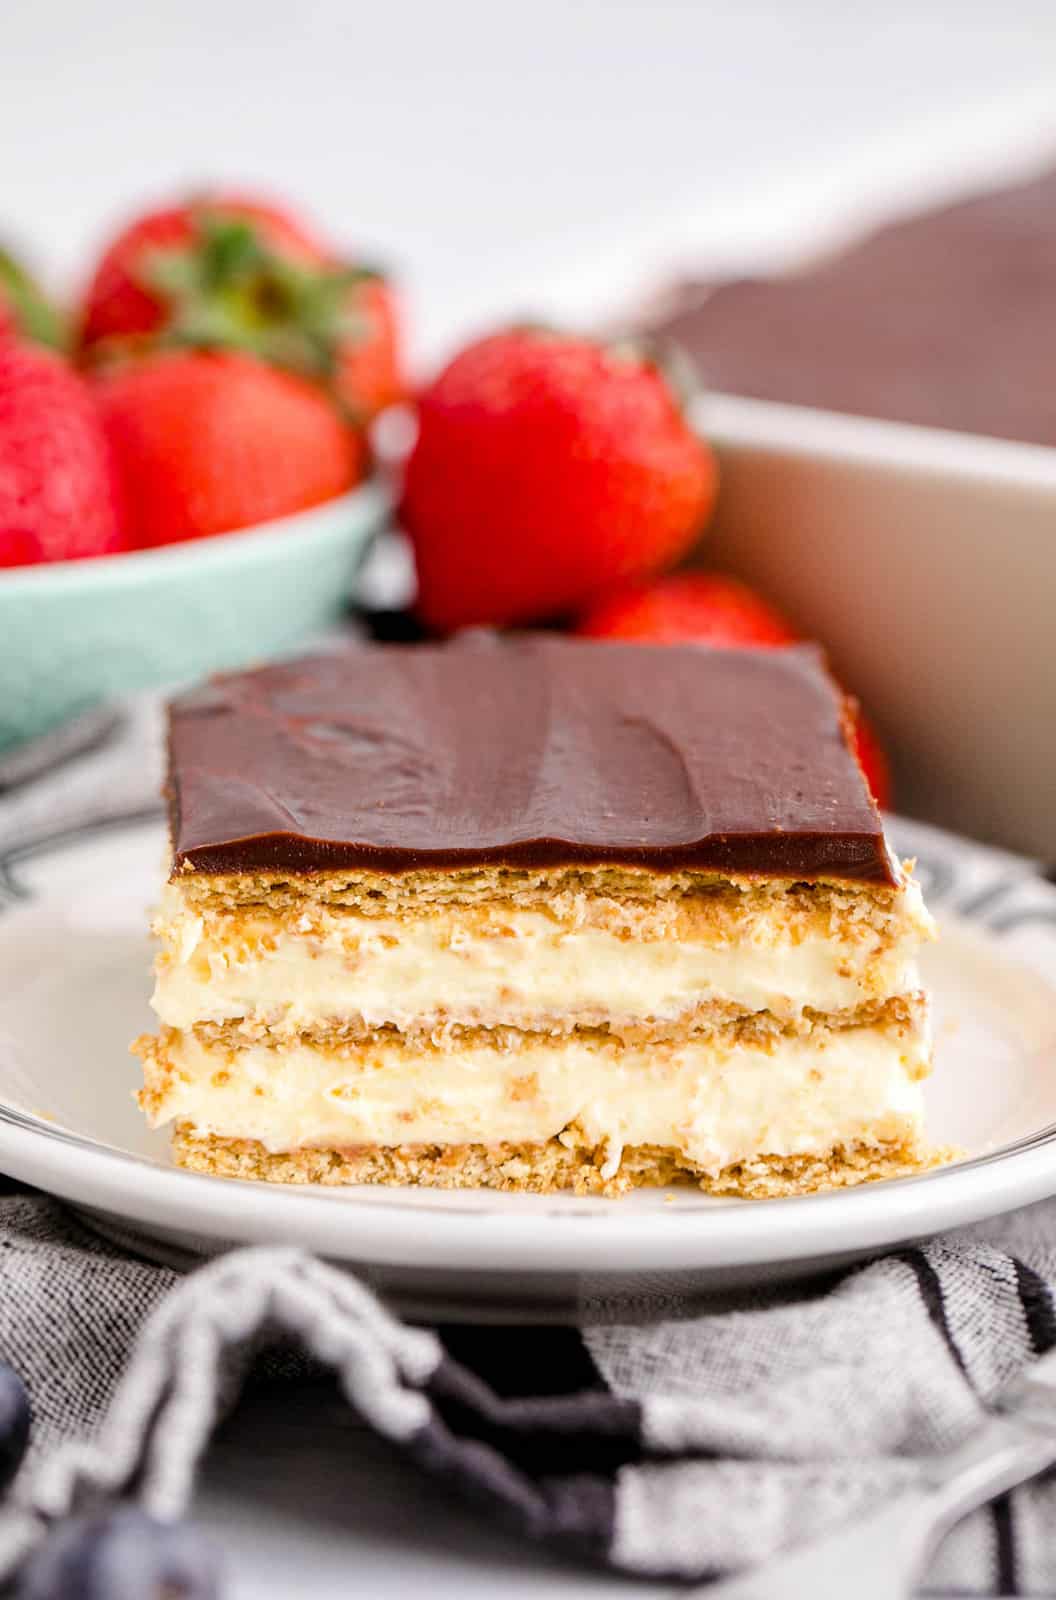 Slice of Eclair Cake on white plate with strawberries behind it.